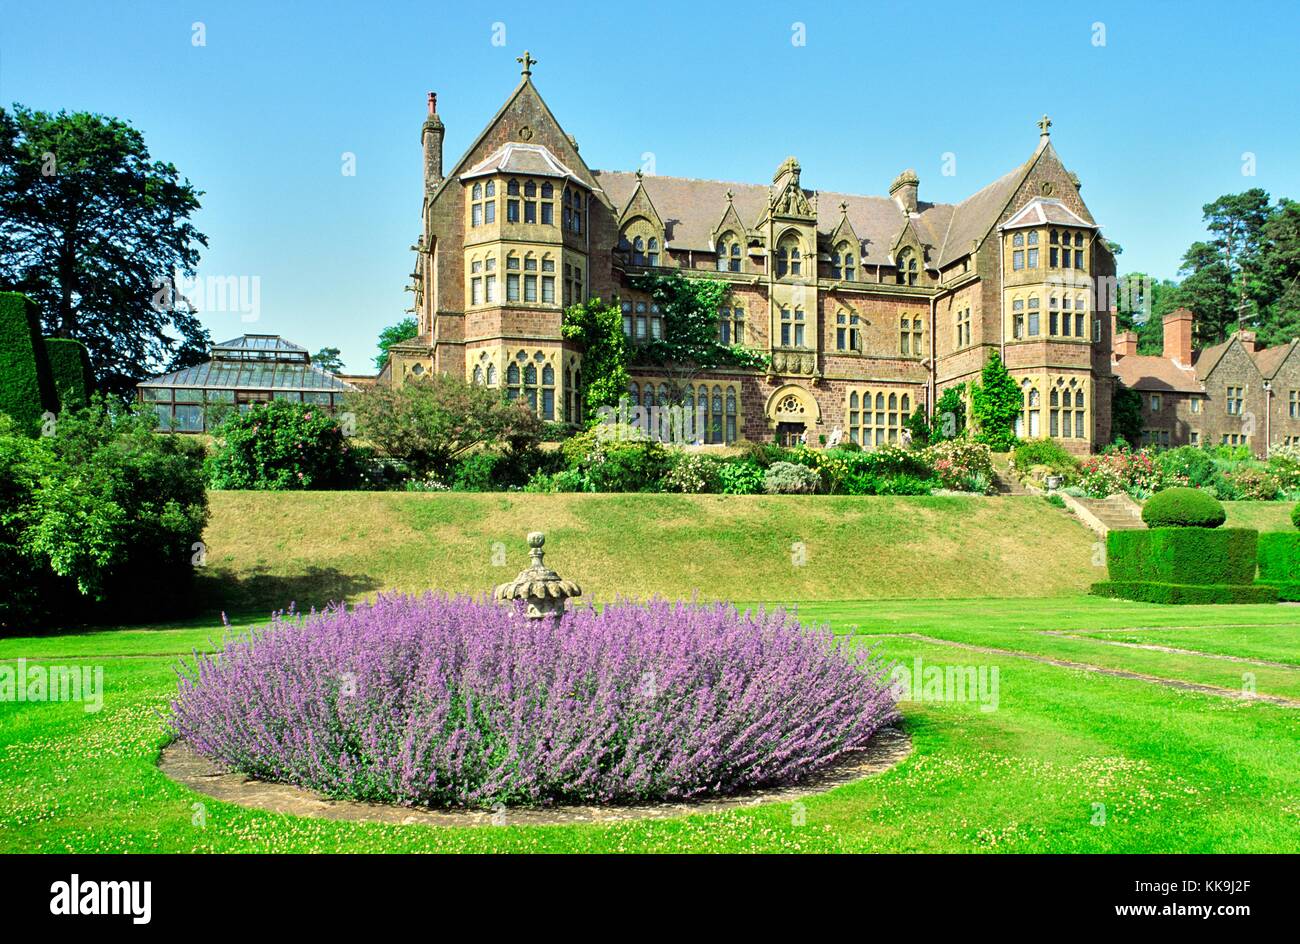 Knightshayes Court. Victorian Gothic Revival style country house near, Tiverton, Devon, England. Built 1869. Stock Photo